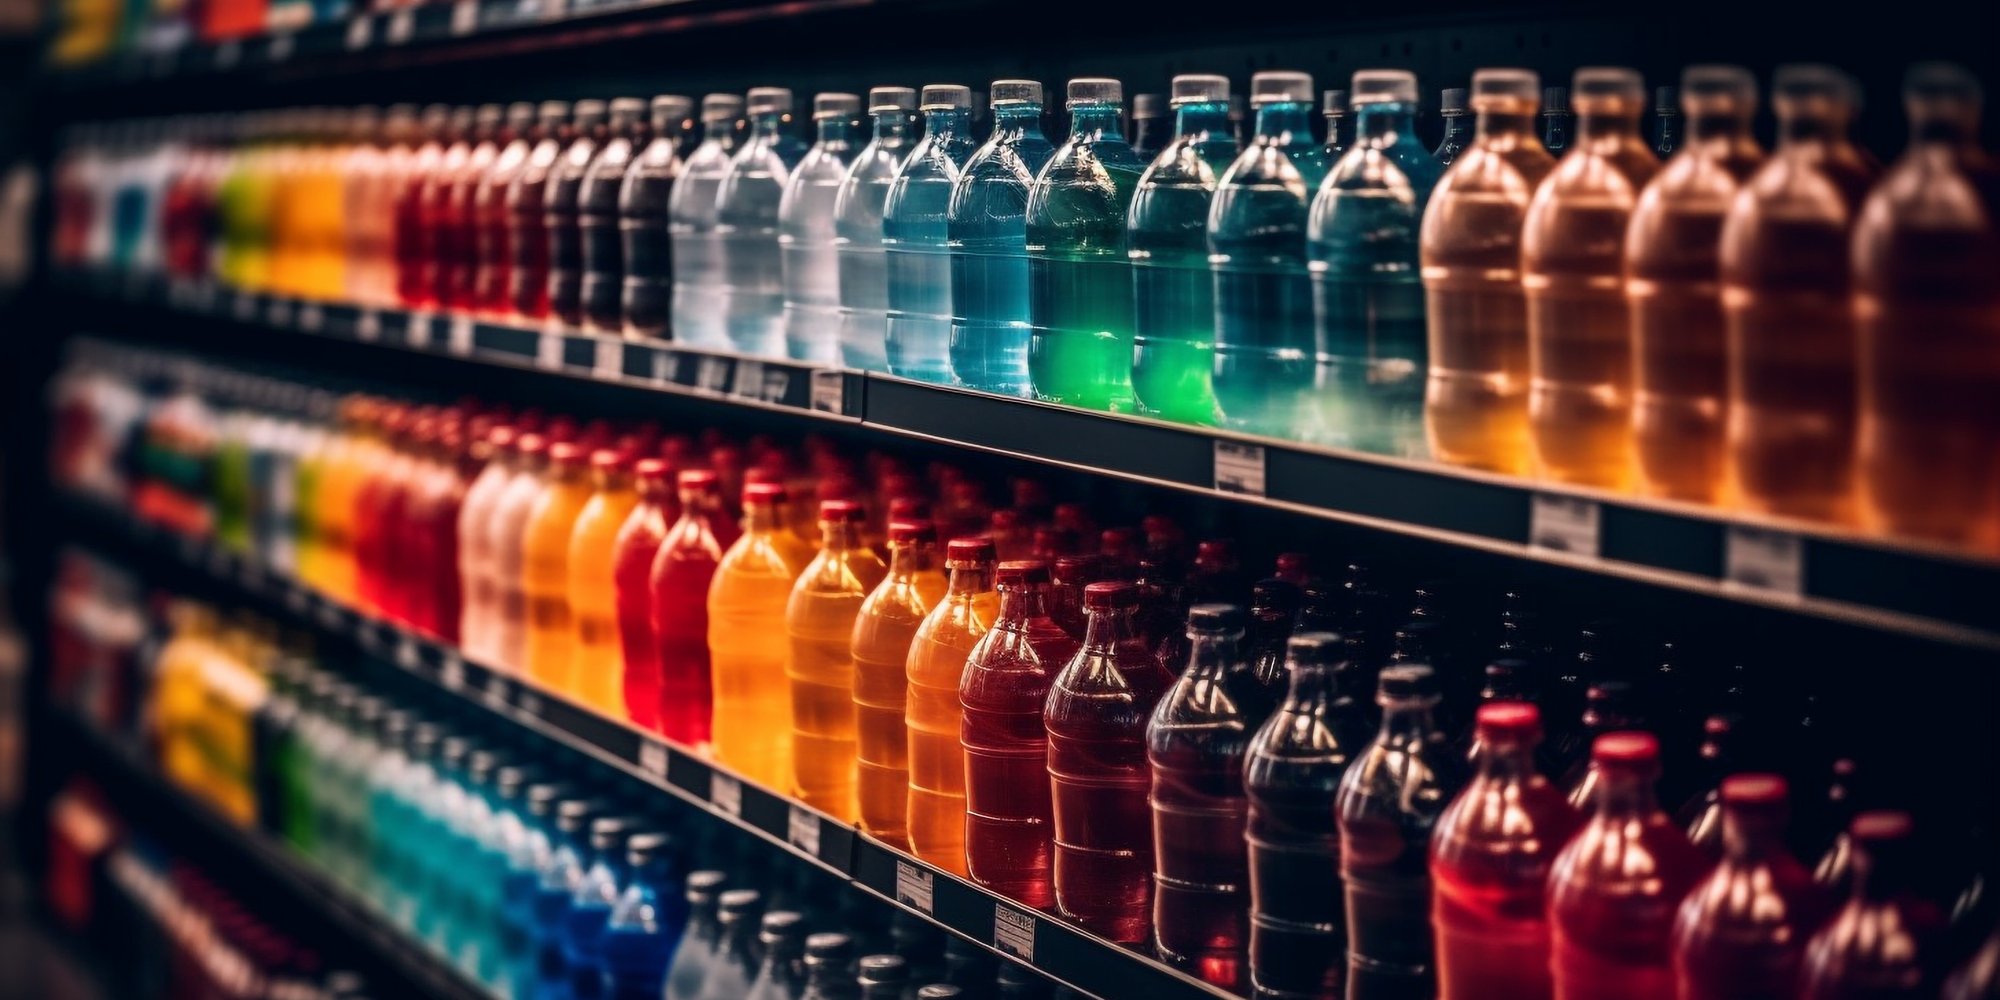 drinks lined up on a grocery store shelf case study image 